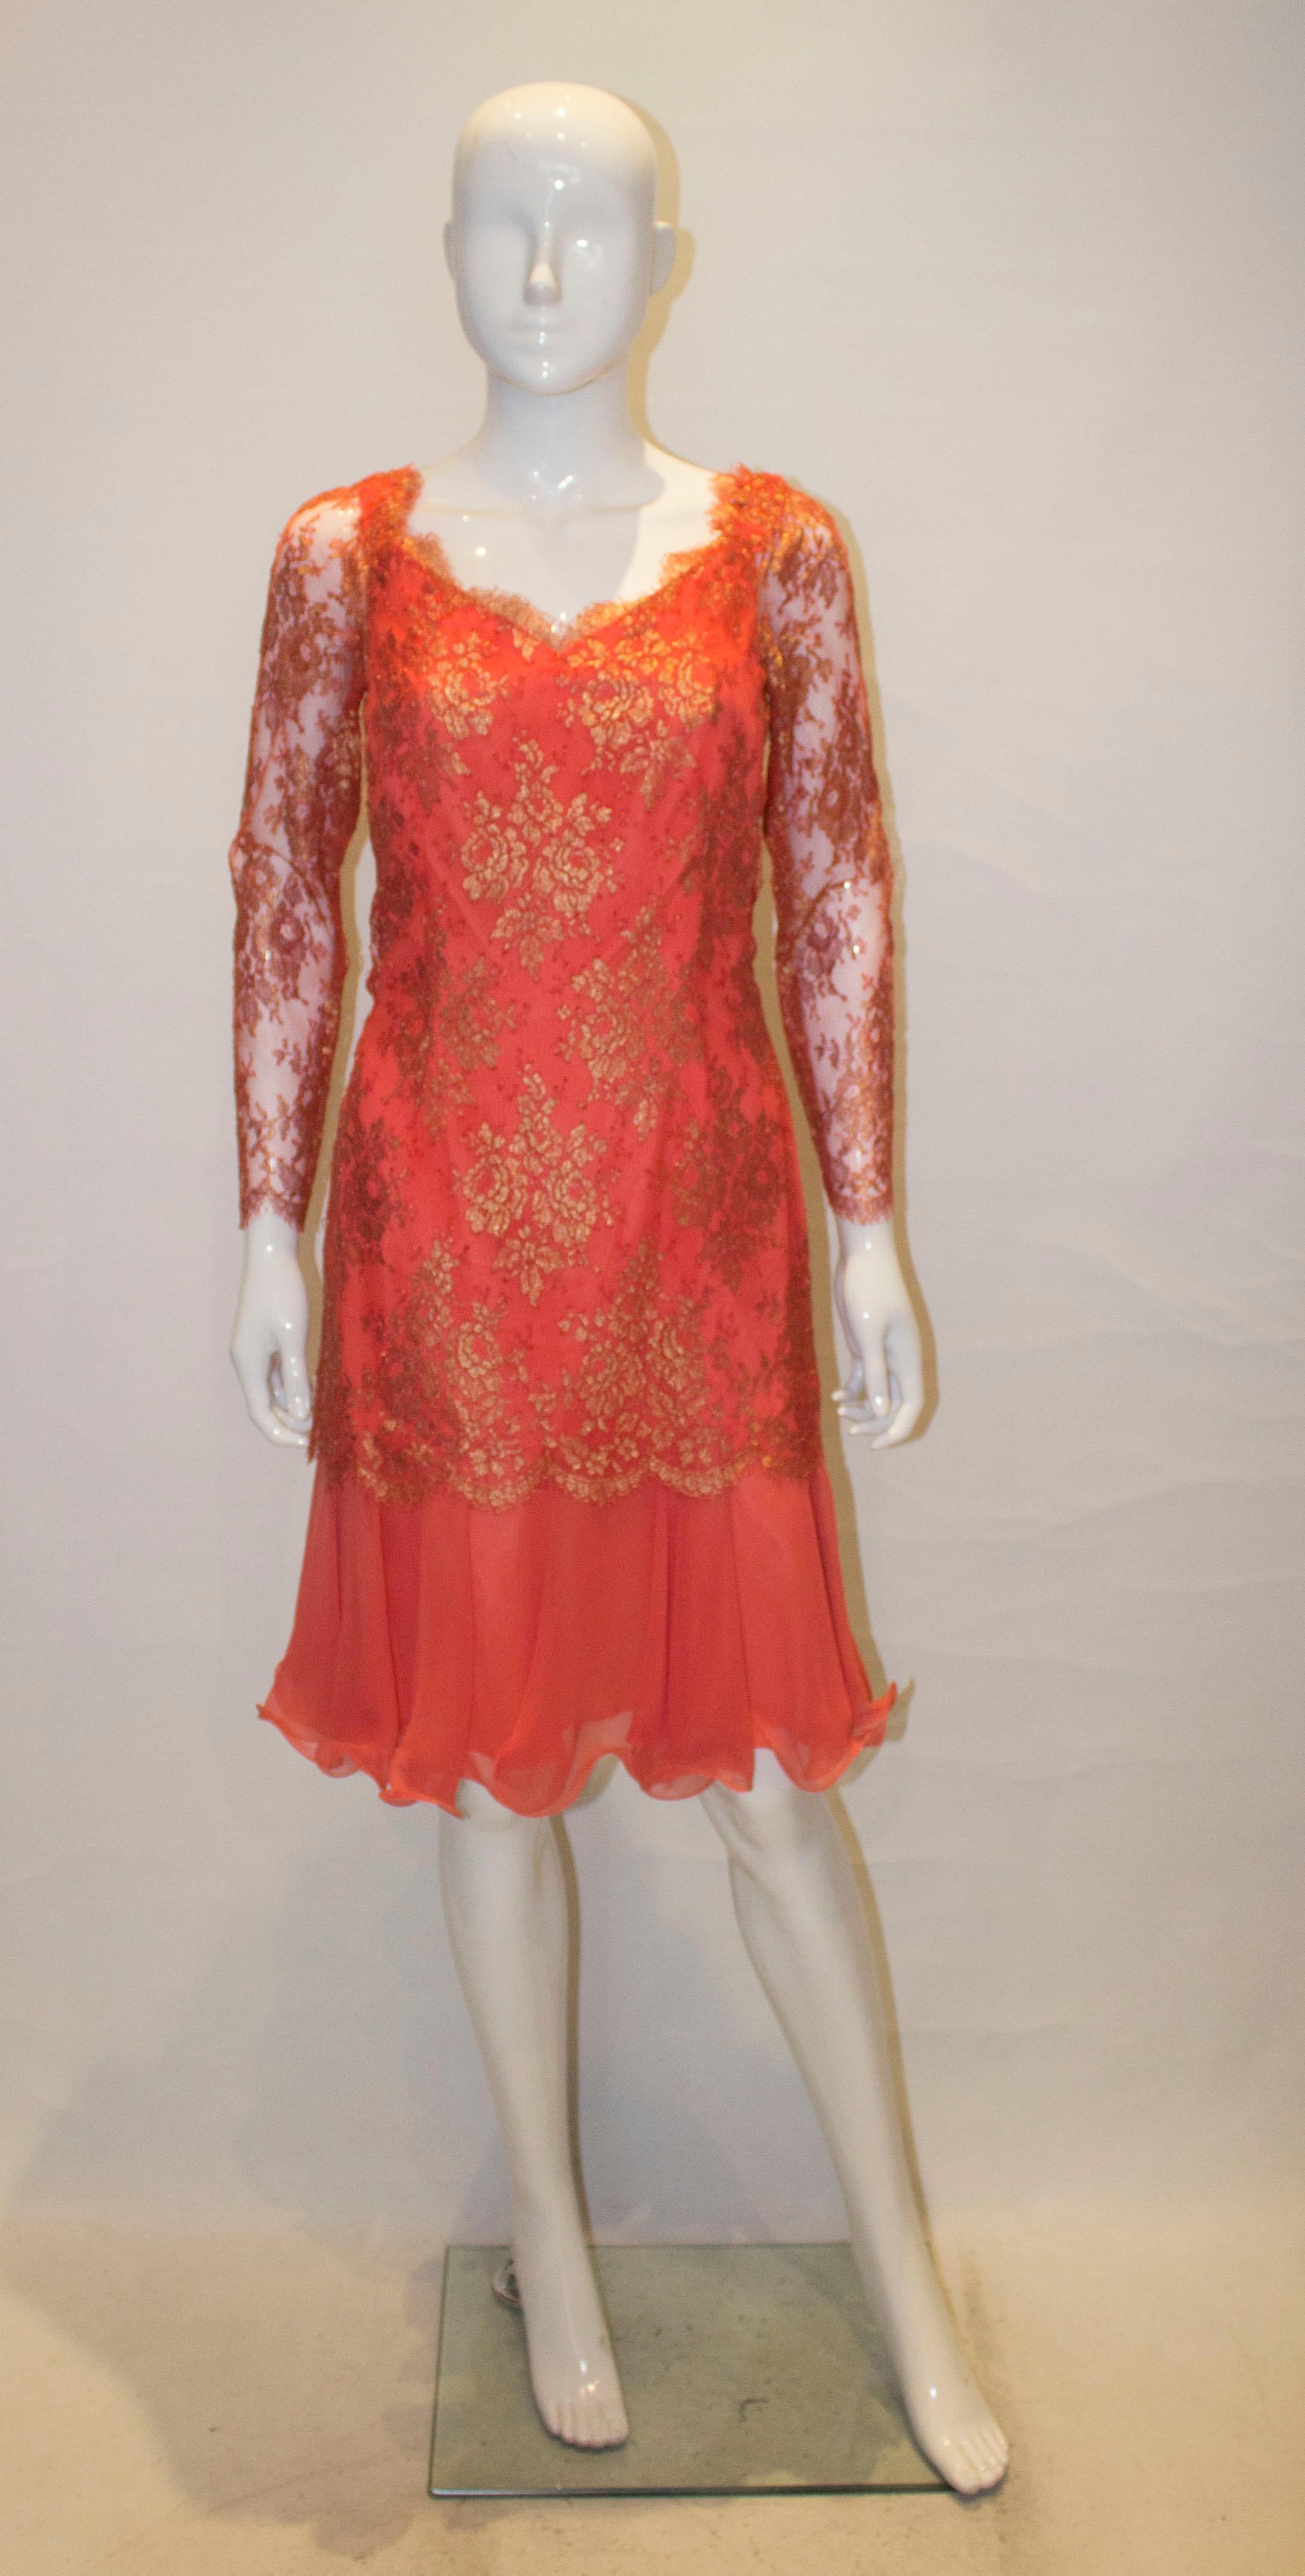 A headturning cocktail dress by Frank Usher. The dress is covered in orange and gold lace, with a wide frill at the hem.It has a v neckline and backline and central back zip.